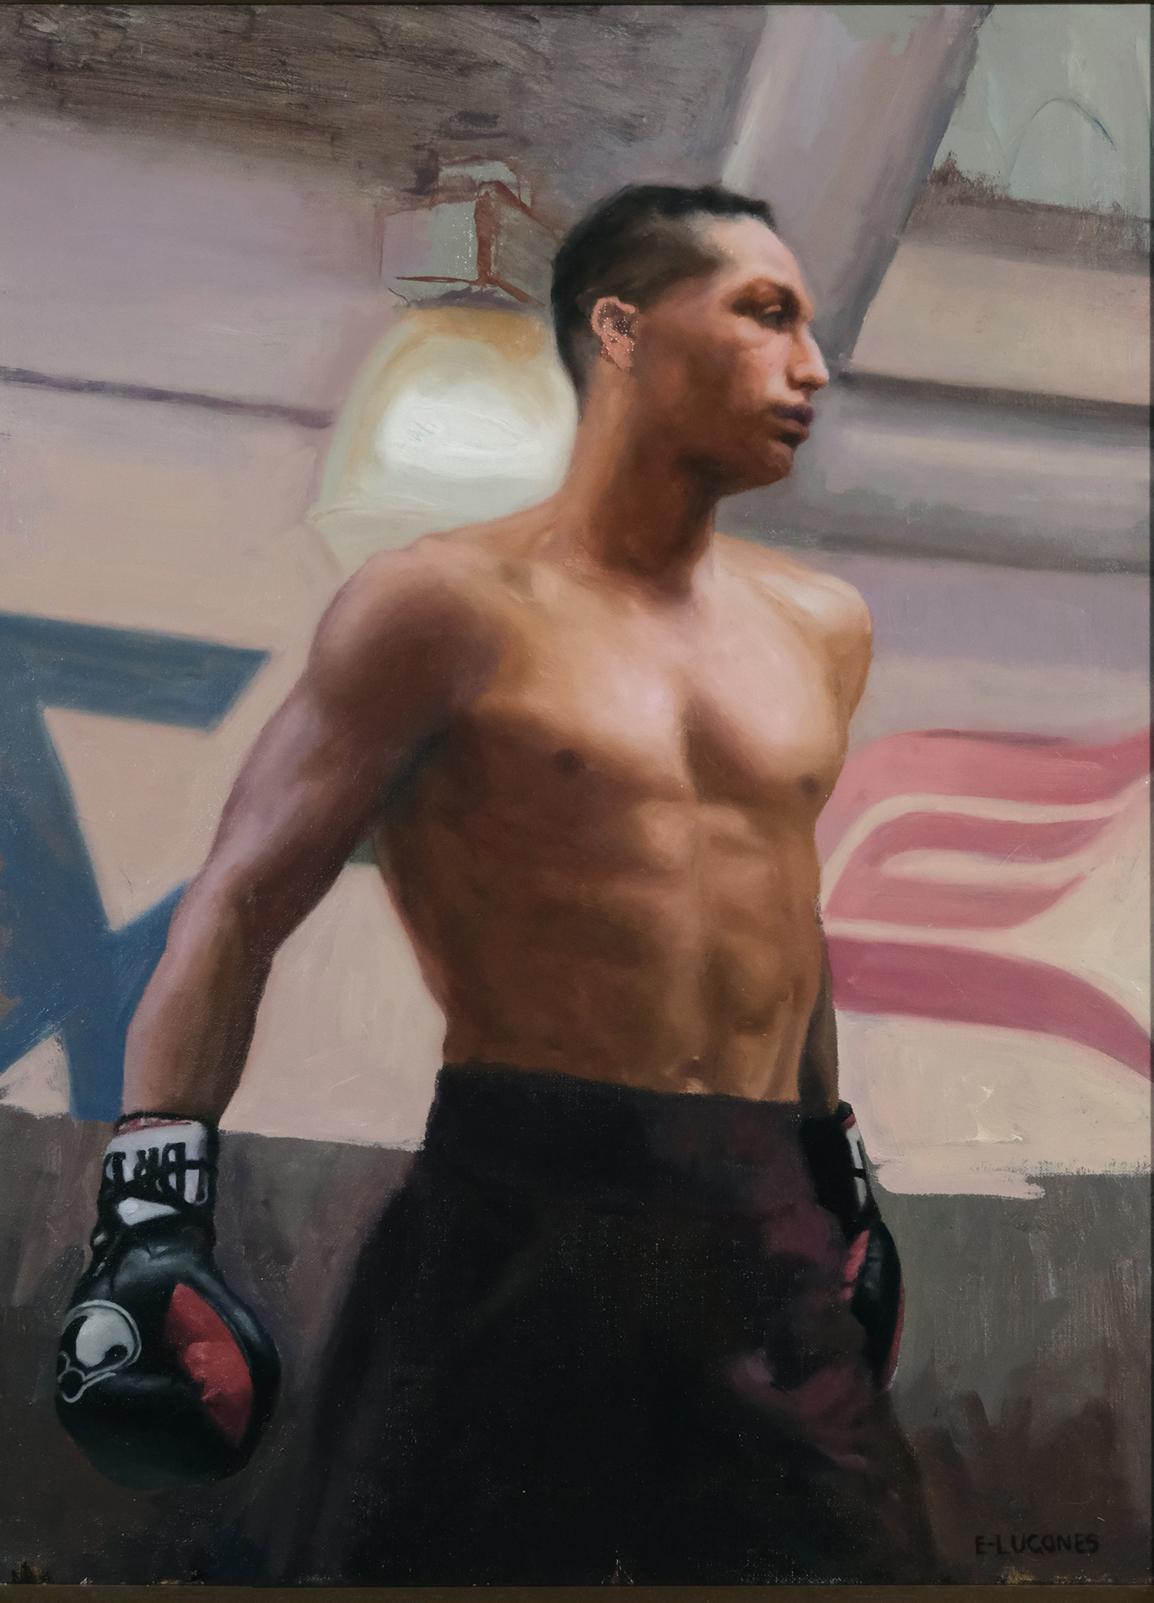 Jarrod Scott Tennant is a oil on linen painting by Cuban-American artist Edel Lugones who lives in Miami, Fl.  It is 28 x 22 framed and 24 x 18 unframed. I Jarrod Scott Tennant is a professional boxer who lives and trains in Los Angeles, California.